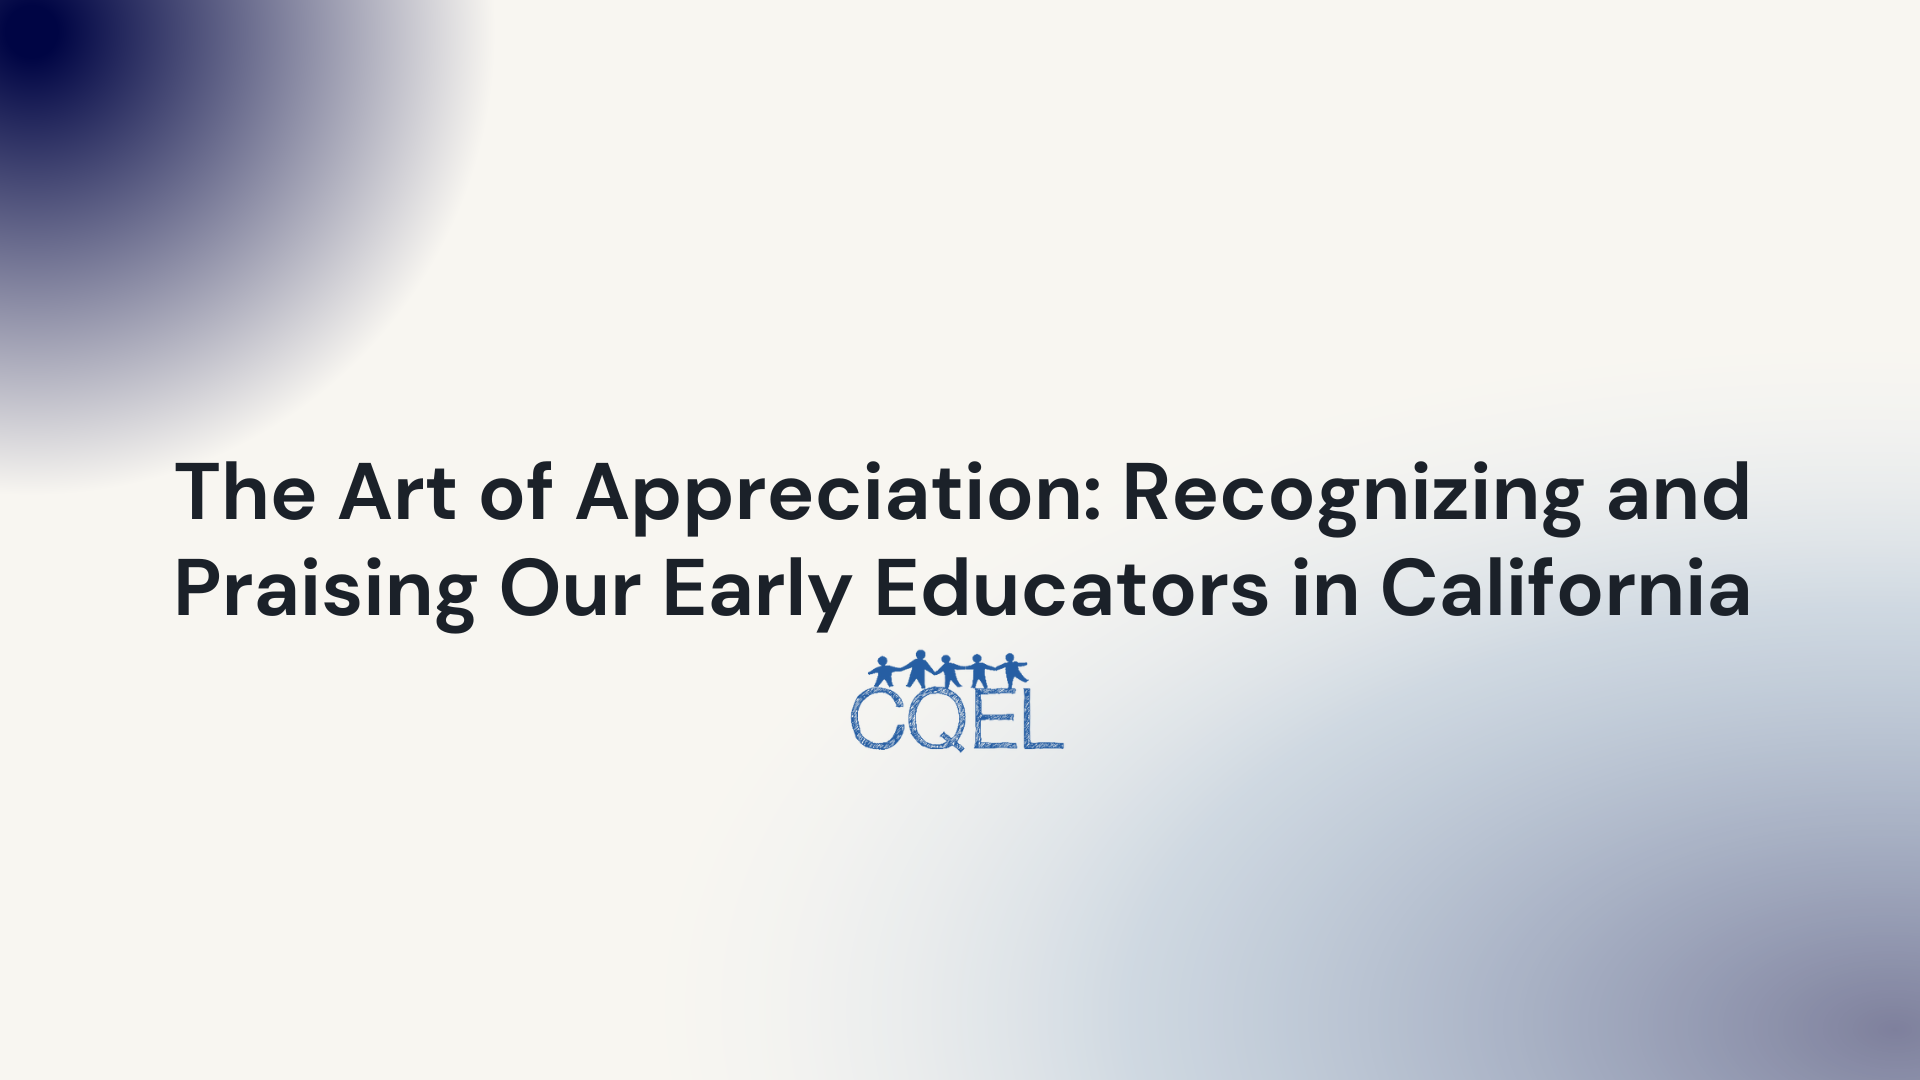 The Art of Appreciation: Recognizing and Praising Our Early Educators in California